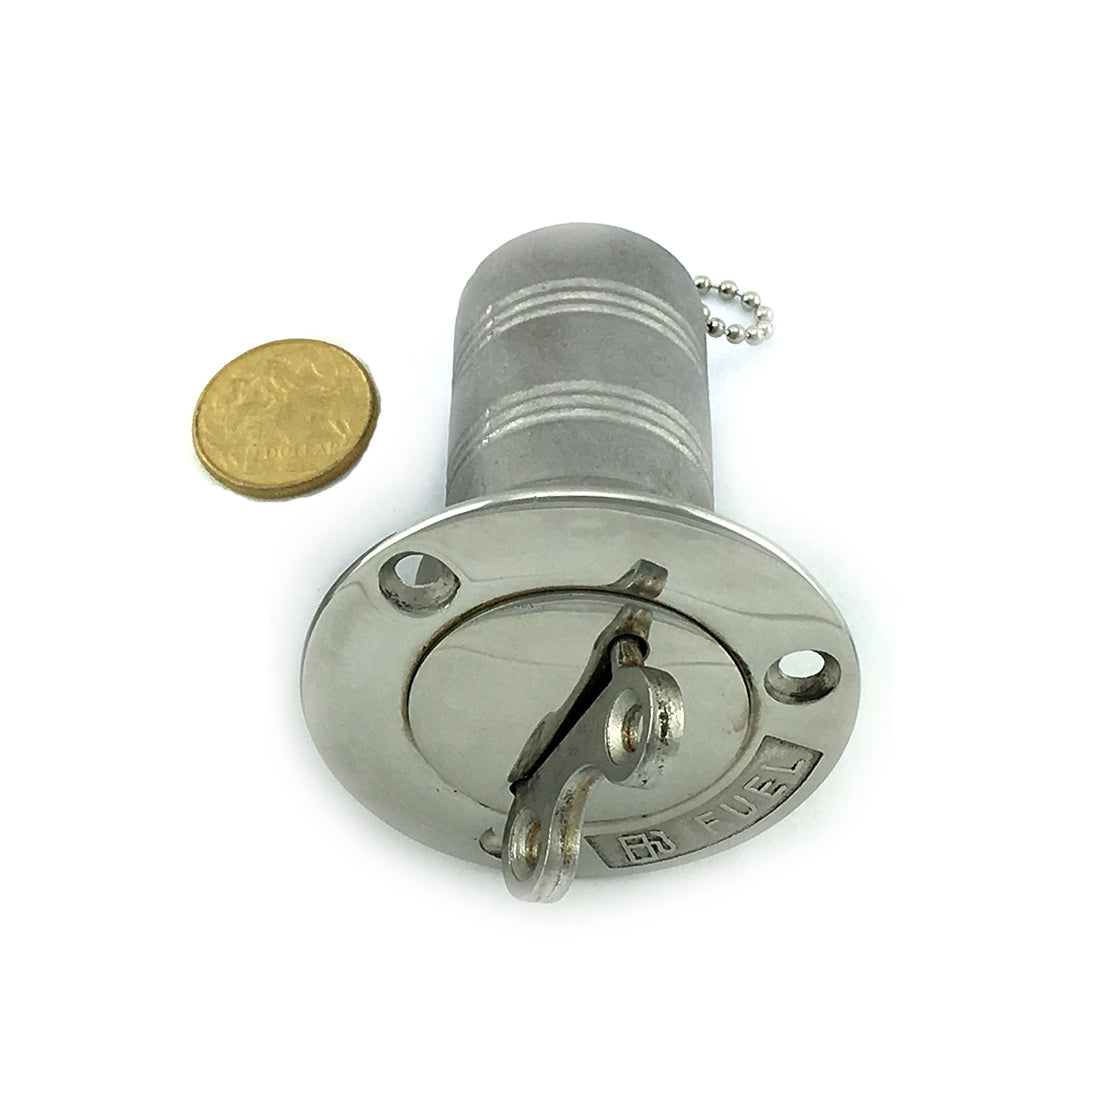 Stainless steel deck fuel nozzle, size 38mm in type 316 marine grade stainless steel. Australia wide shipping.